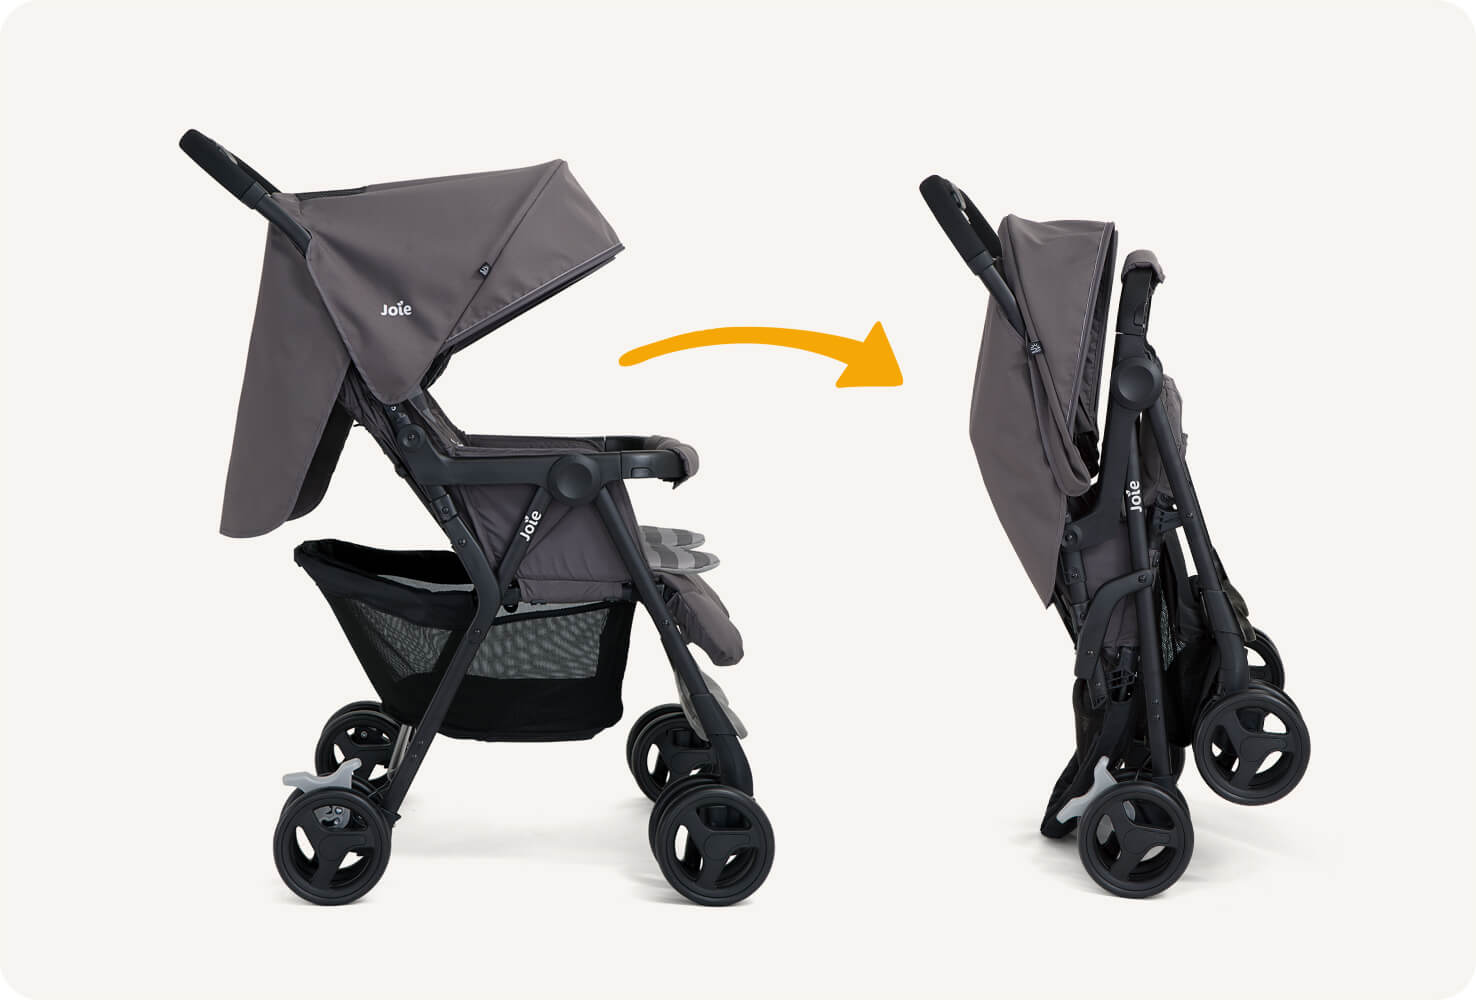 Two dark gray Joie Aire Twin double strollers side by side in profile facing to the right: the stroller on the left is open and the stroller on the right is folded, with an orange arrow pointing from the left to the right.